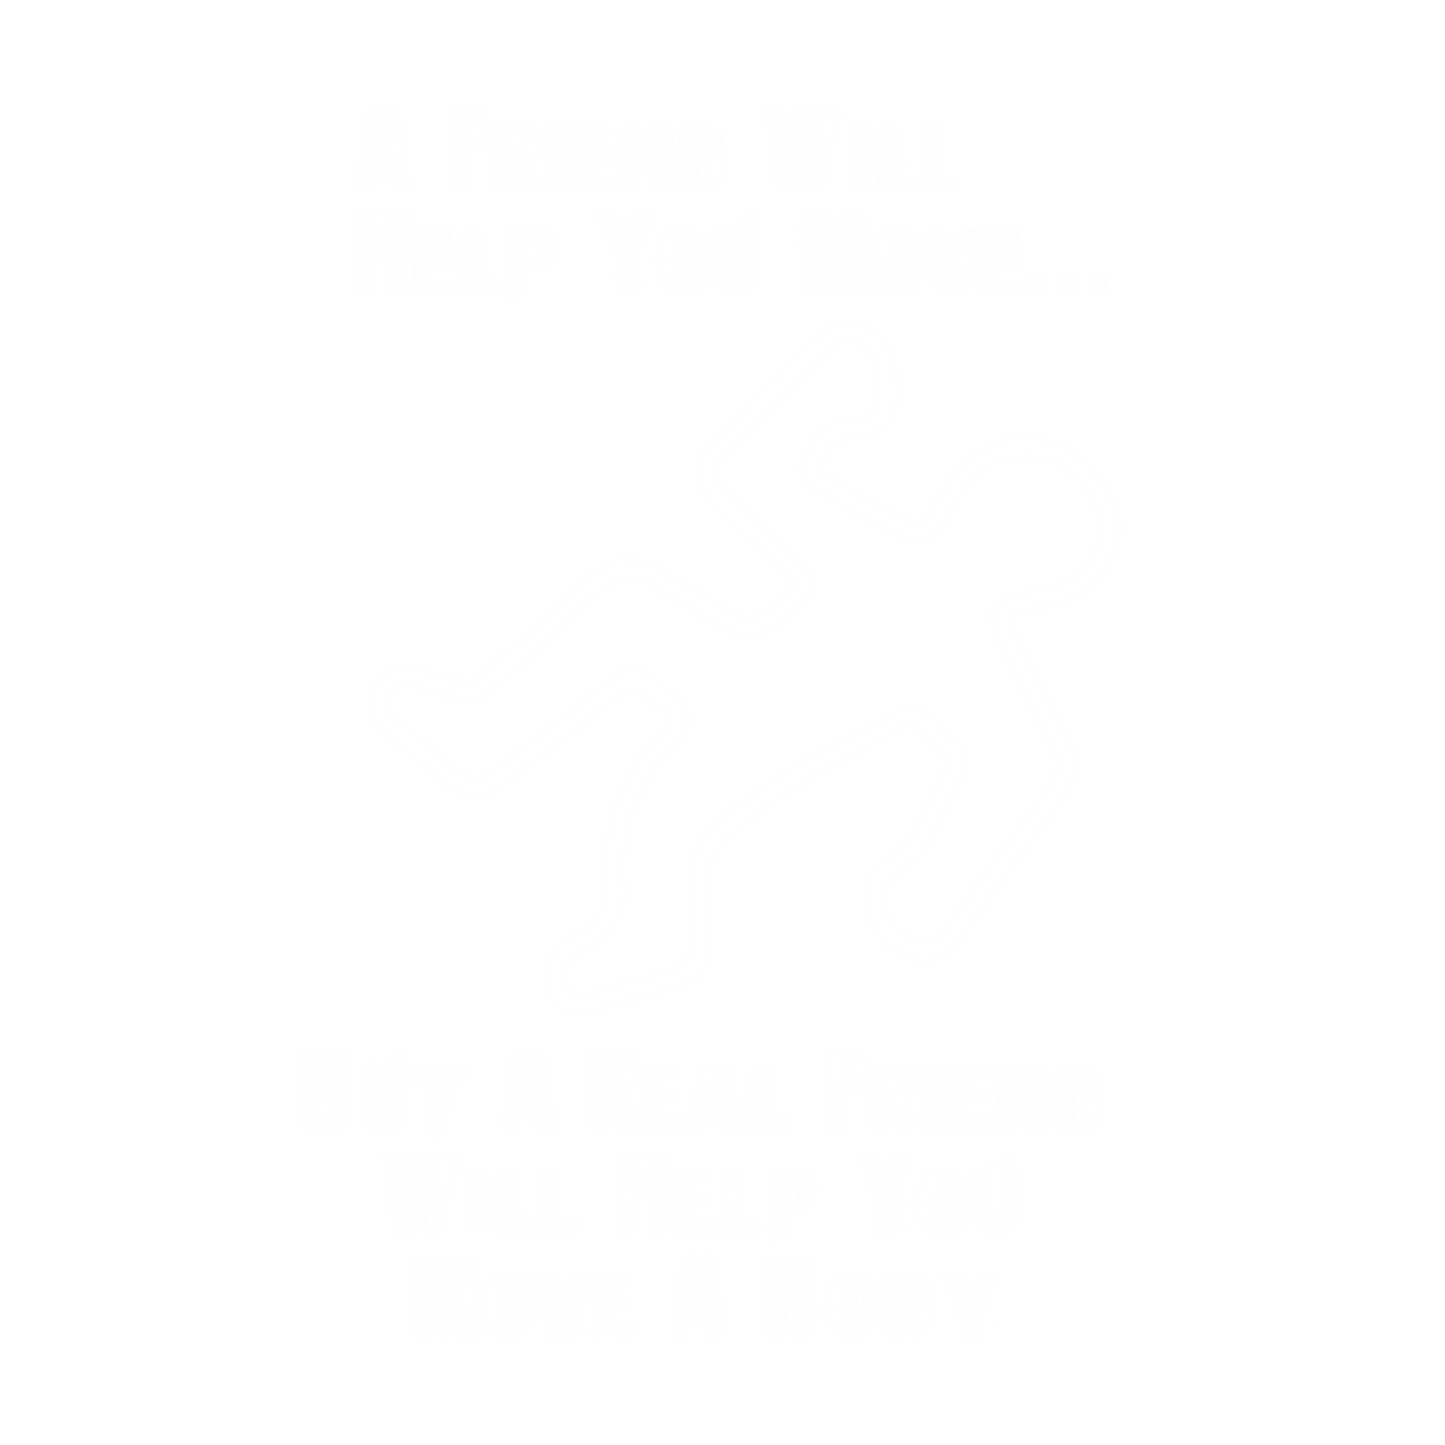 Funny T-Shirts design "A Friend Will Help You Move… But A Real Friend Will Help You Move A Body"